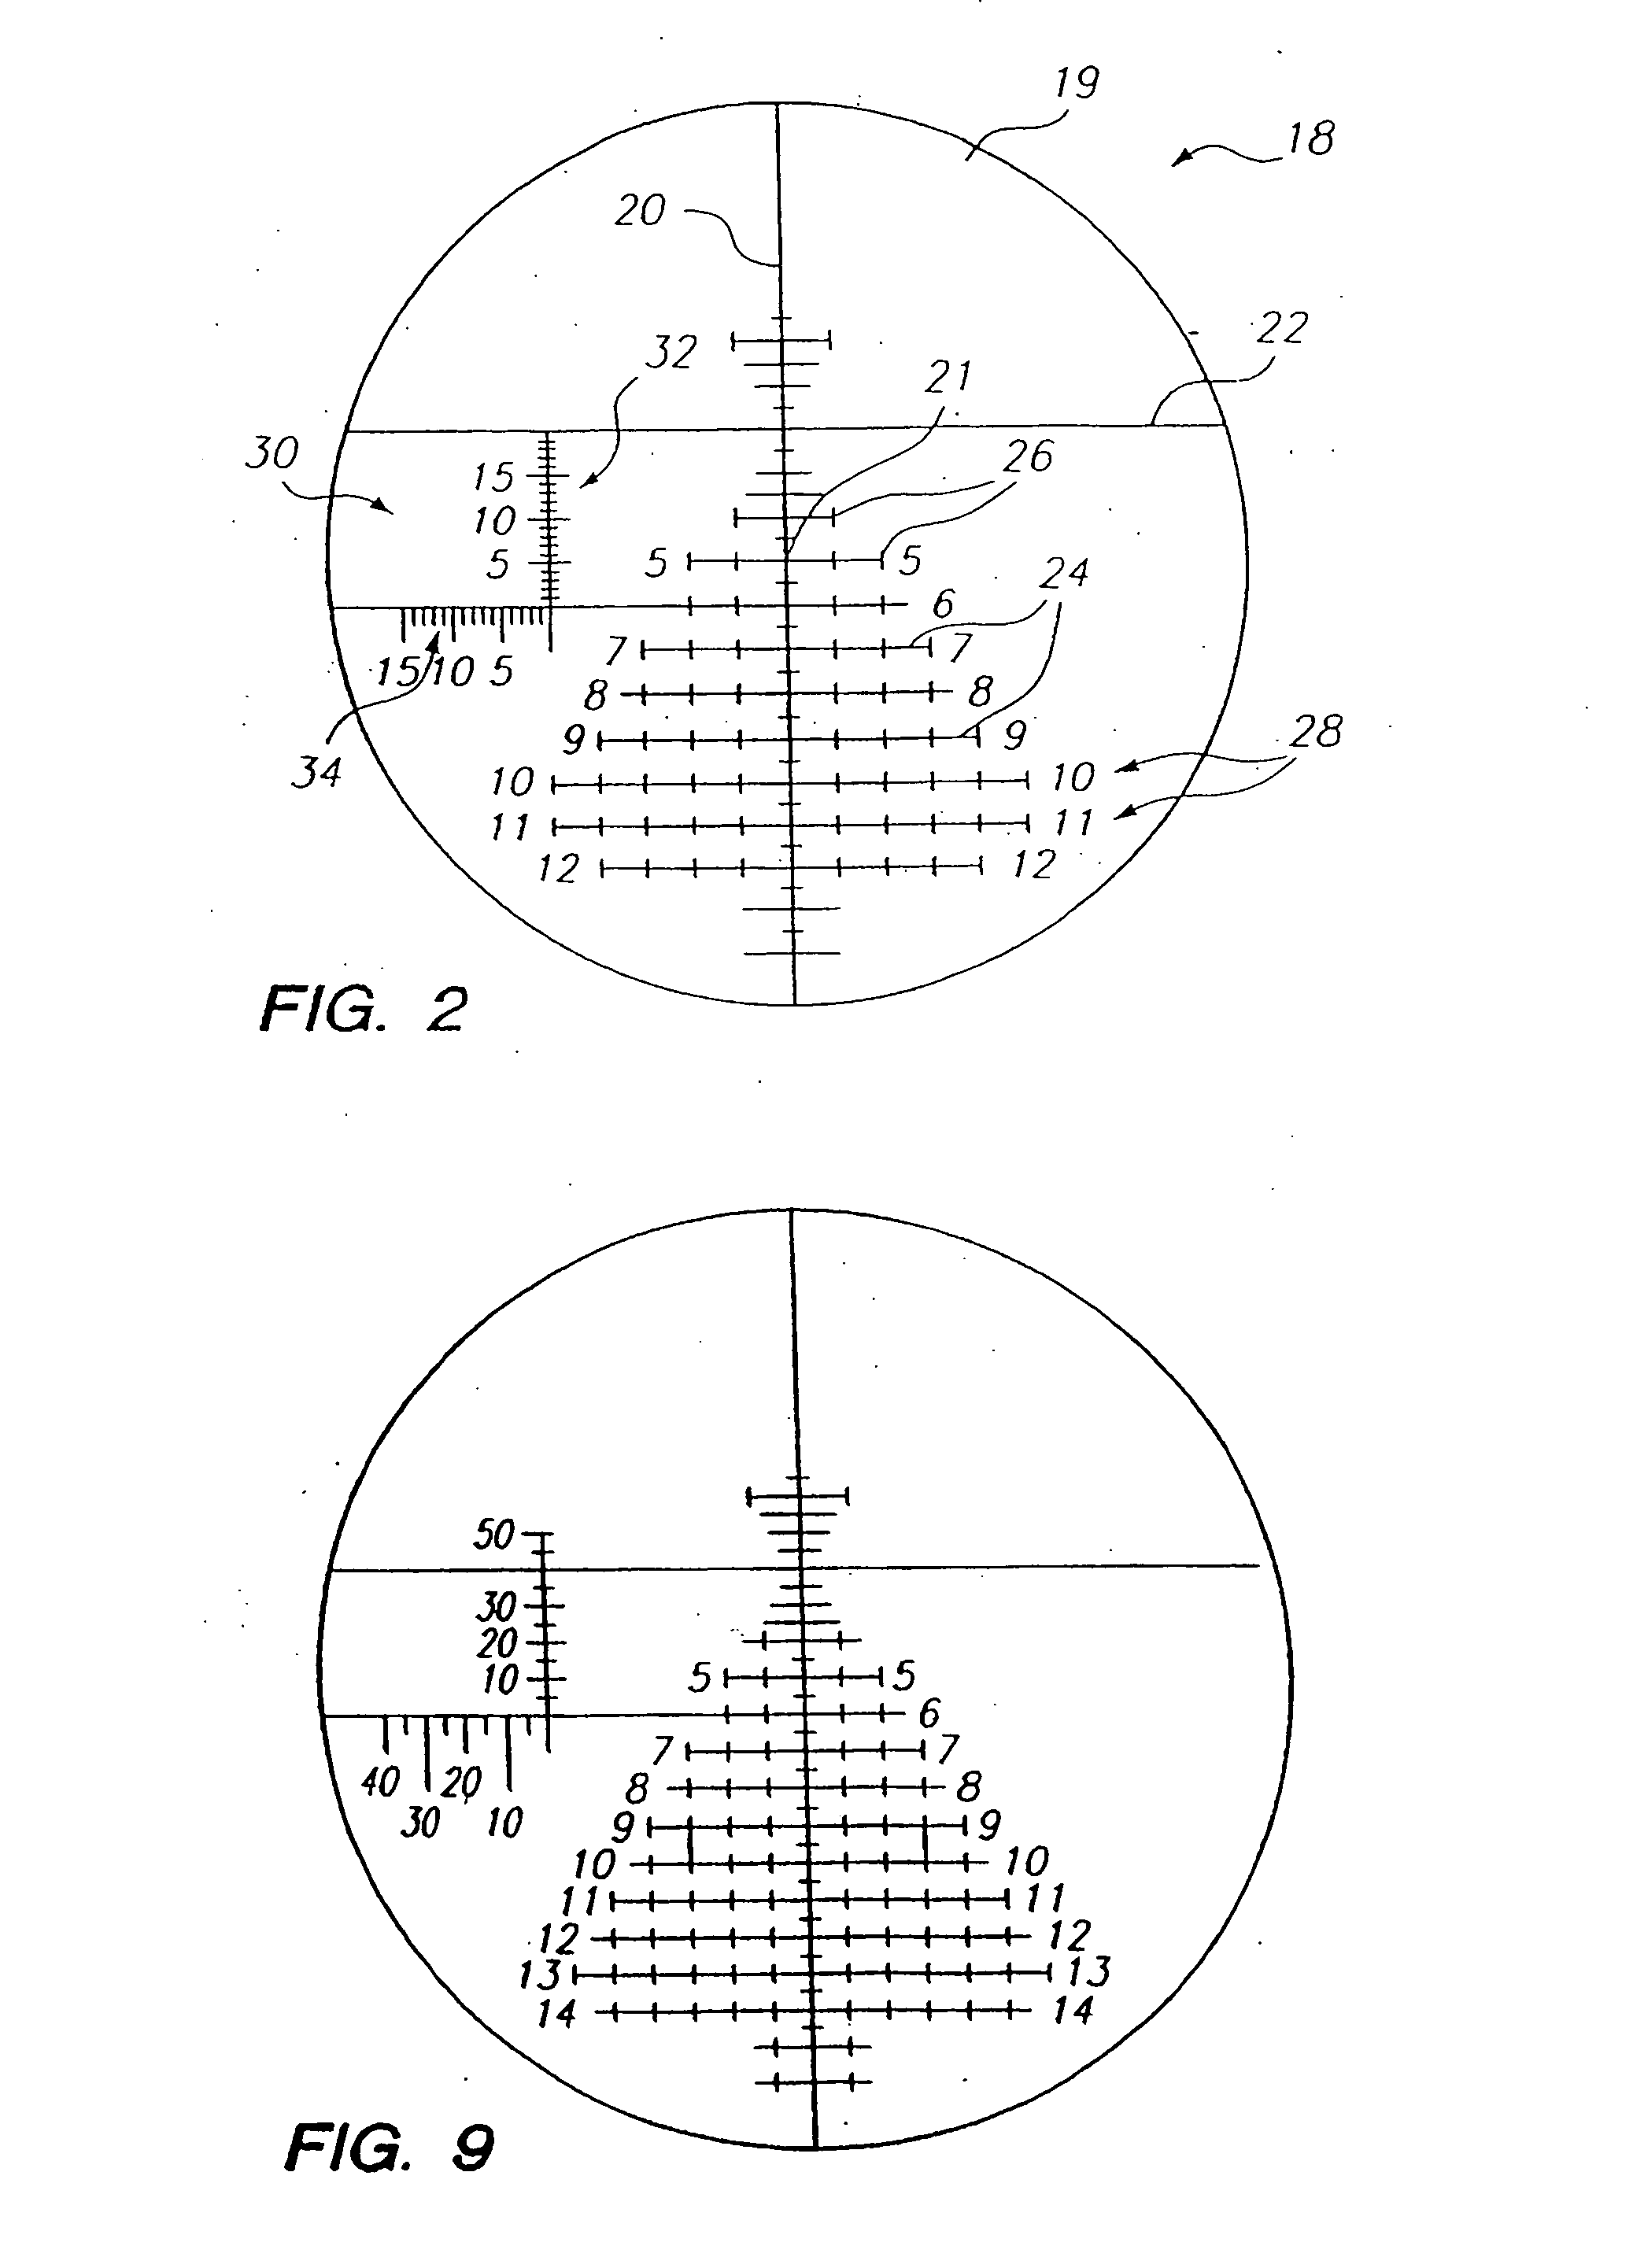 Apparatus and method for calculating aiming point information